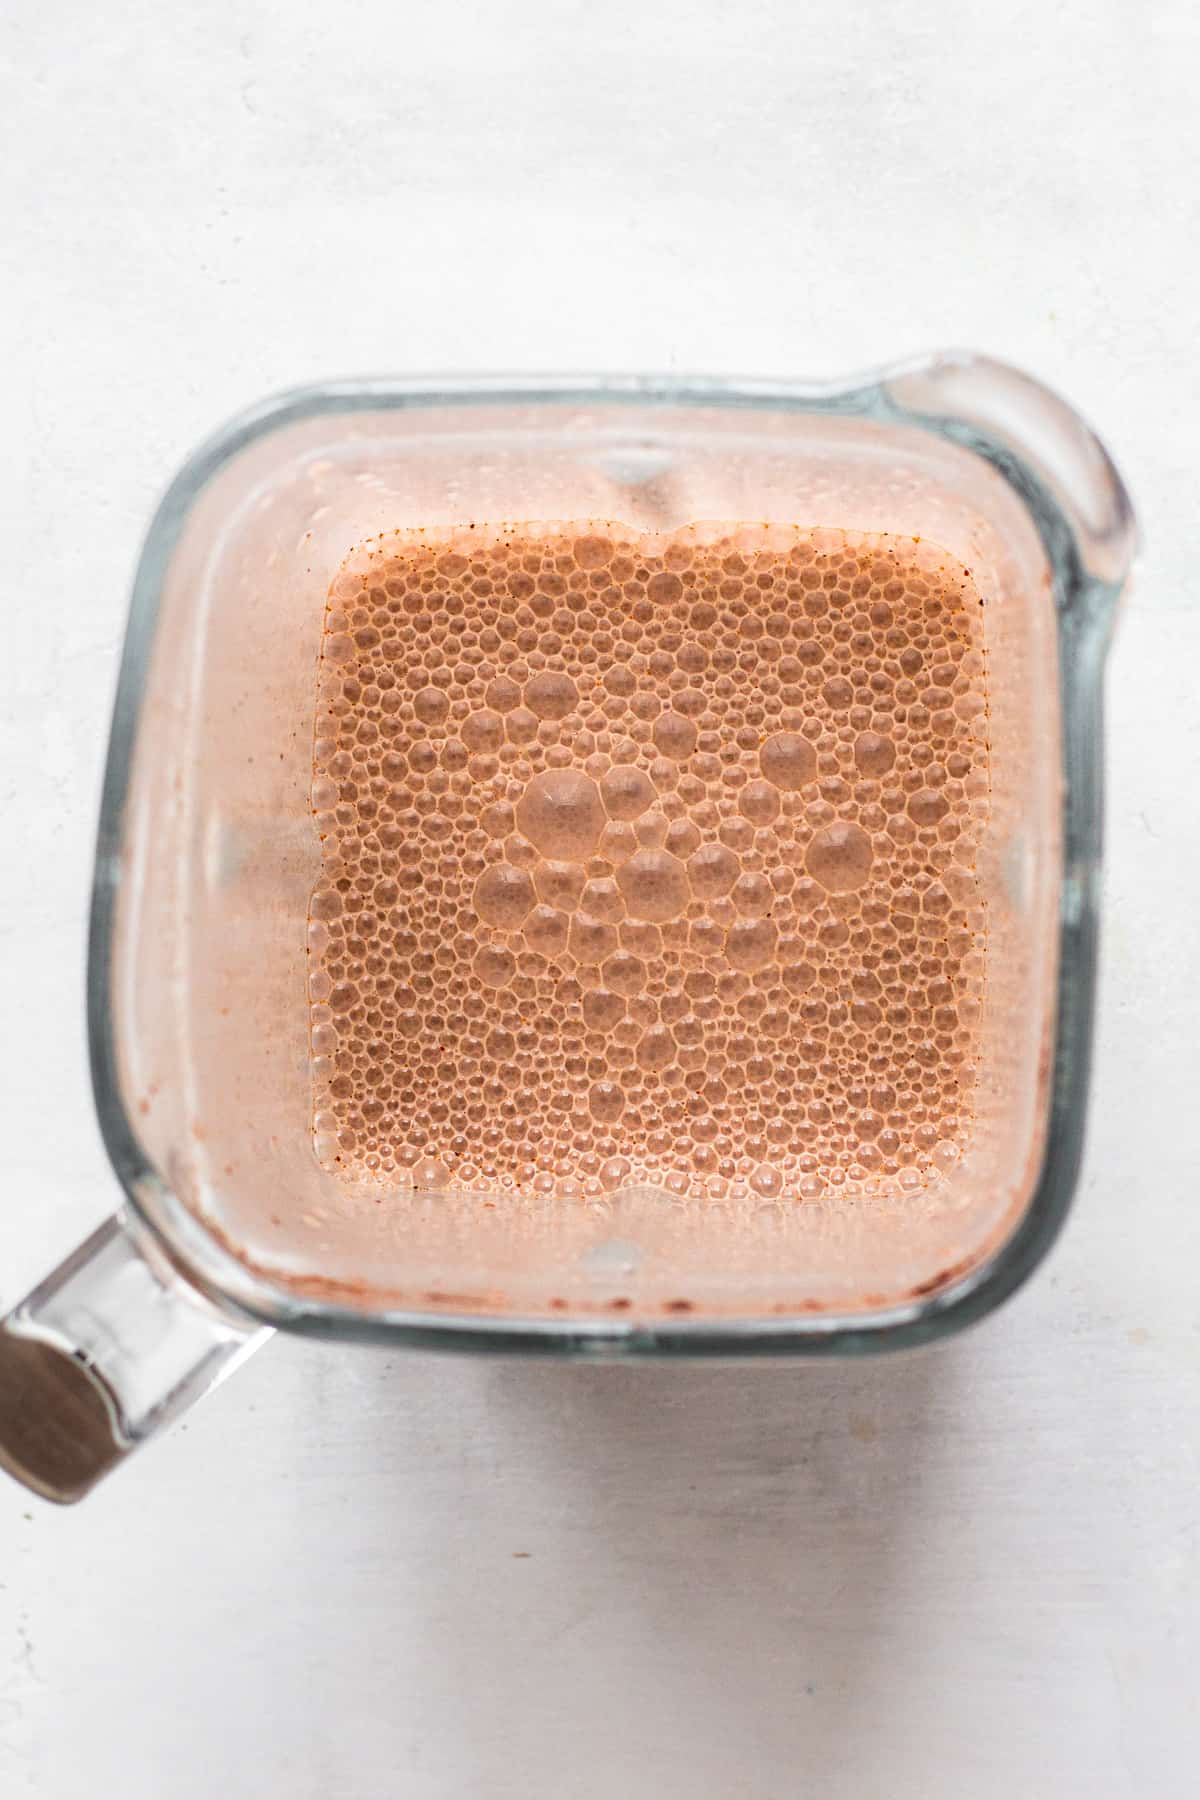 Top view of a blended chocolate smoothie with lots of small air bubbles.